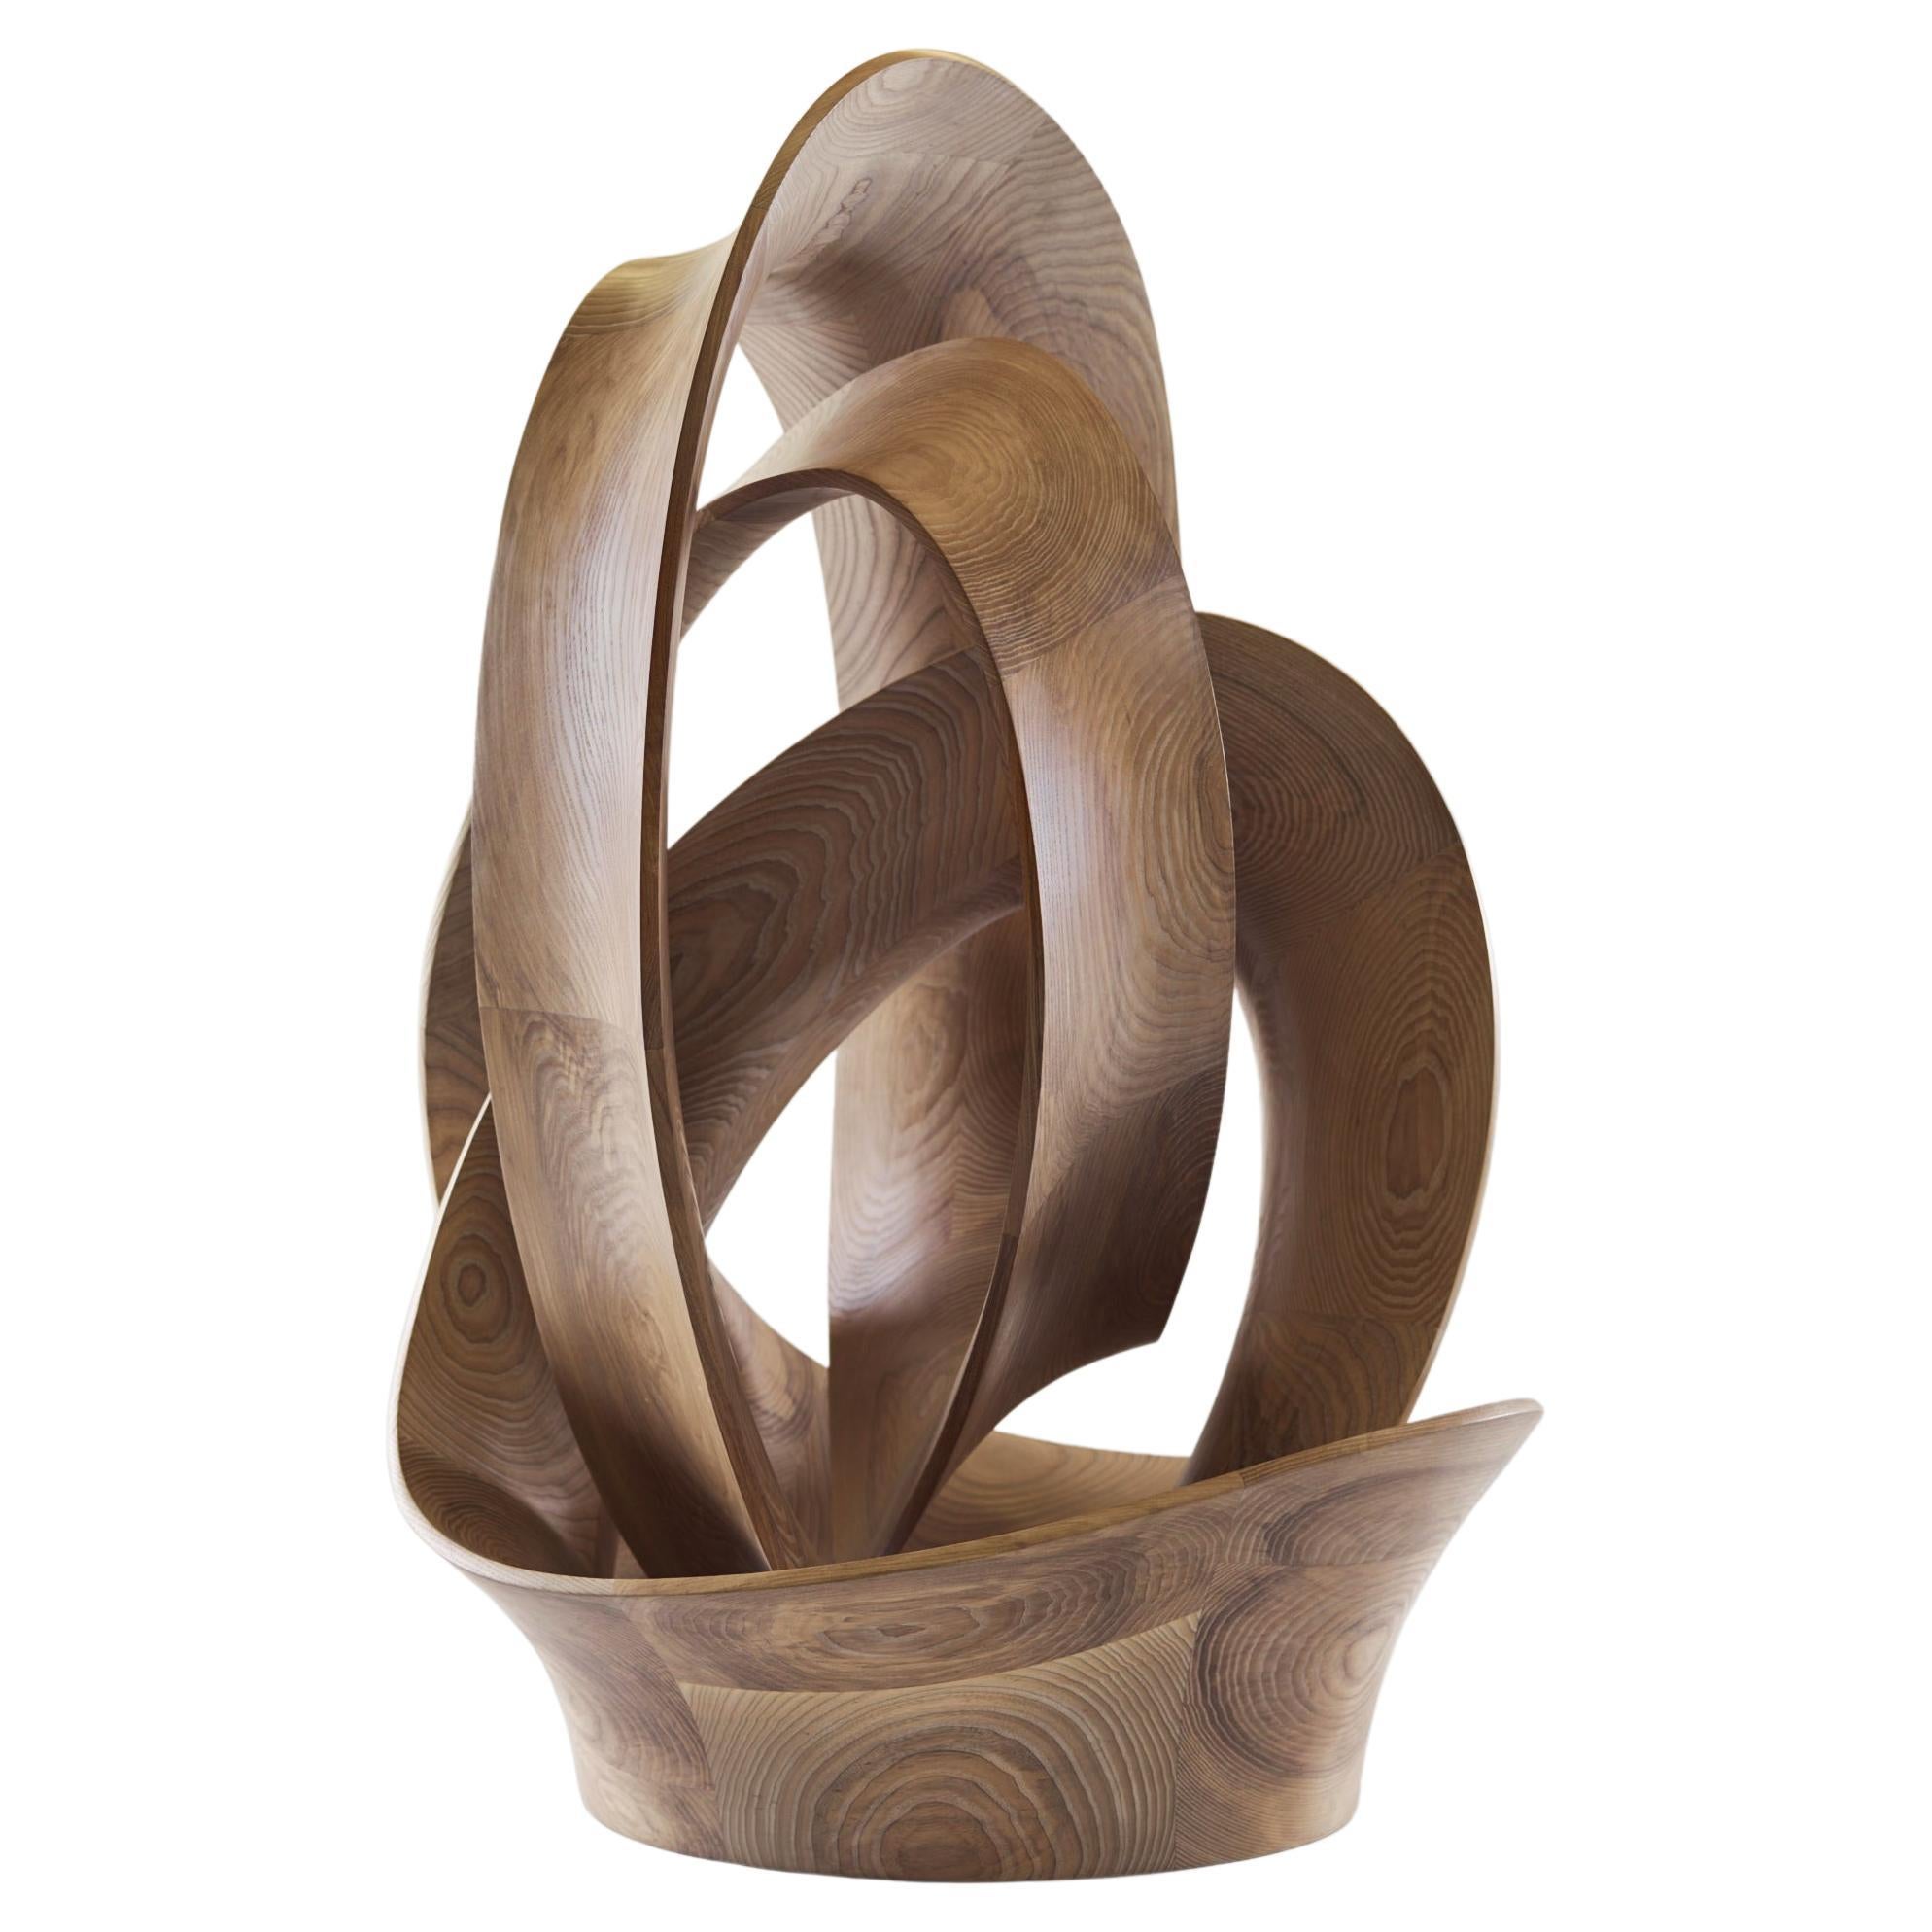 Contemporary 'knotted' sculpture in natural or ebonized ash by master maker For Sale